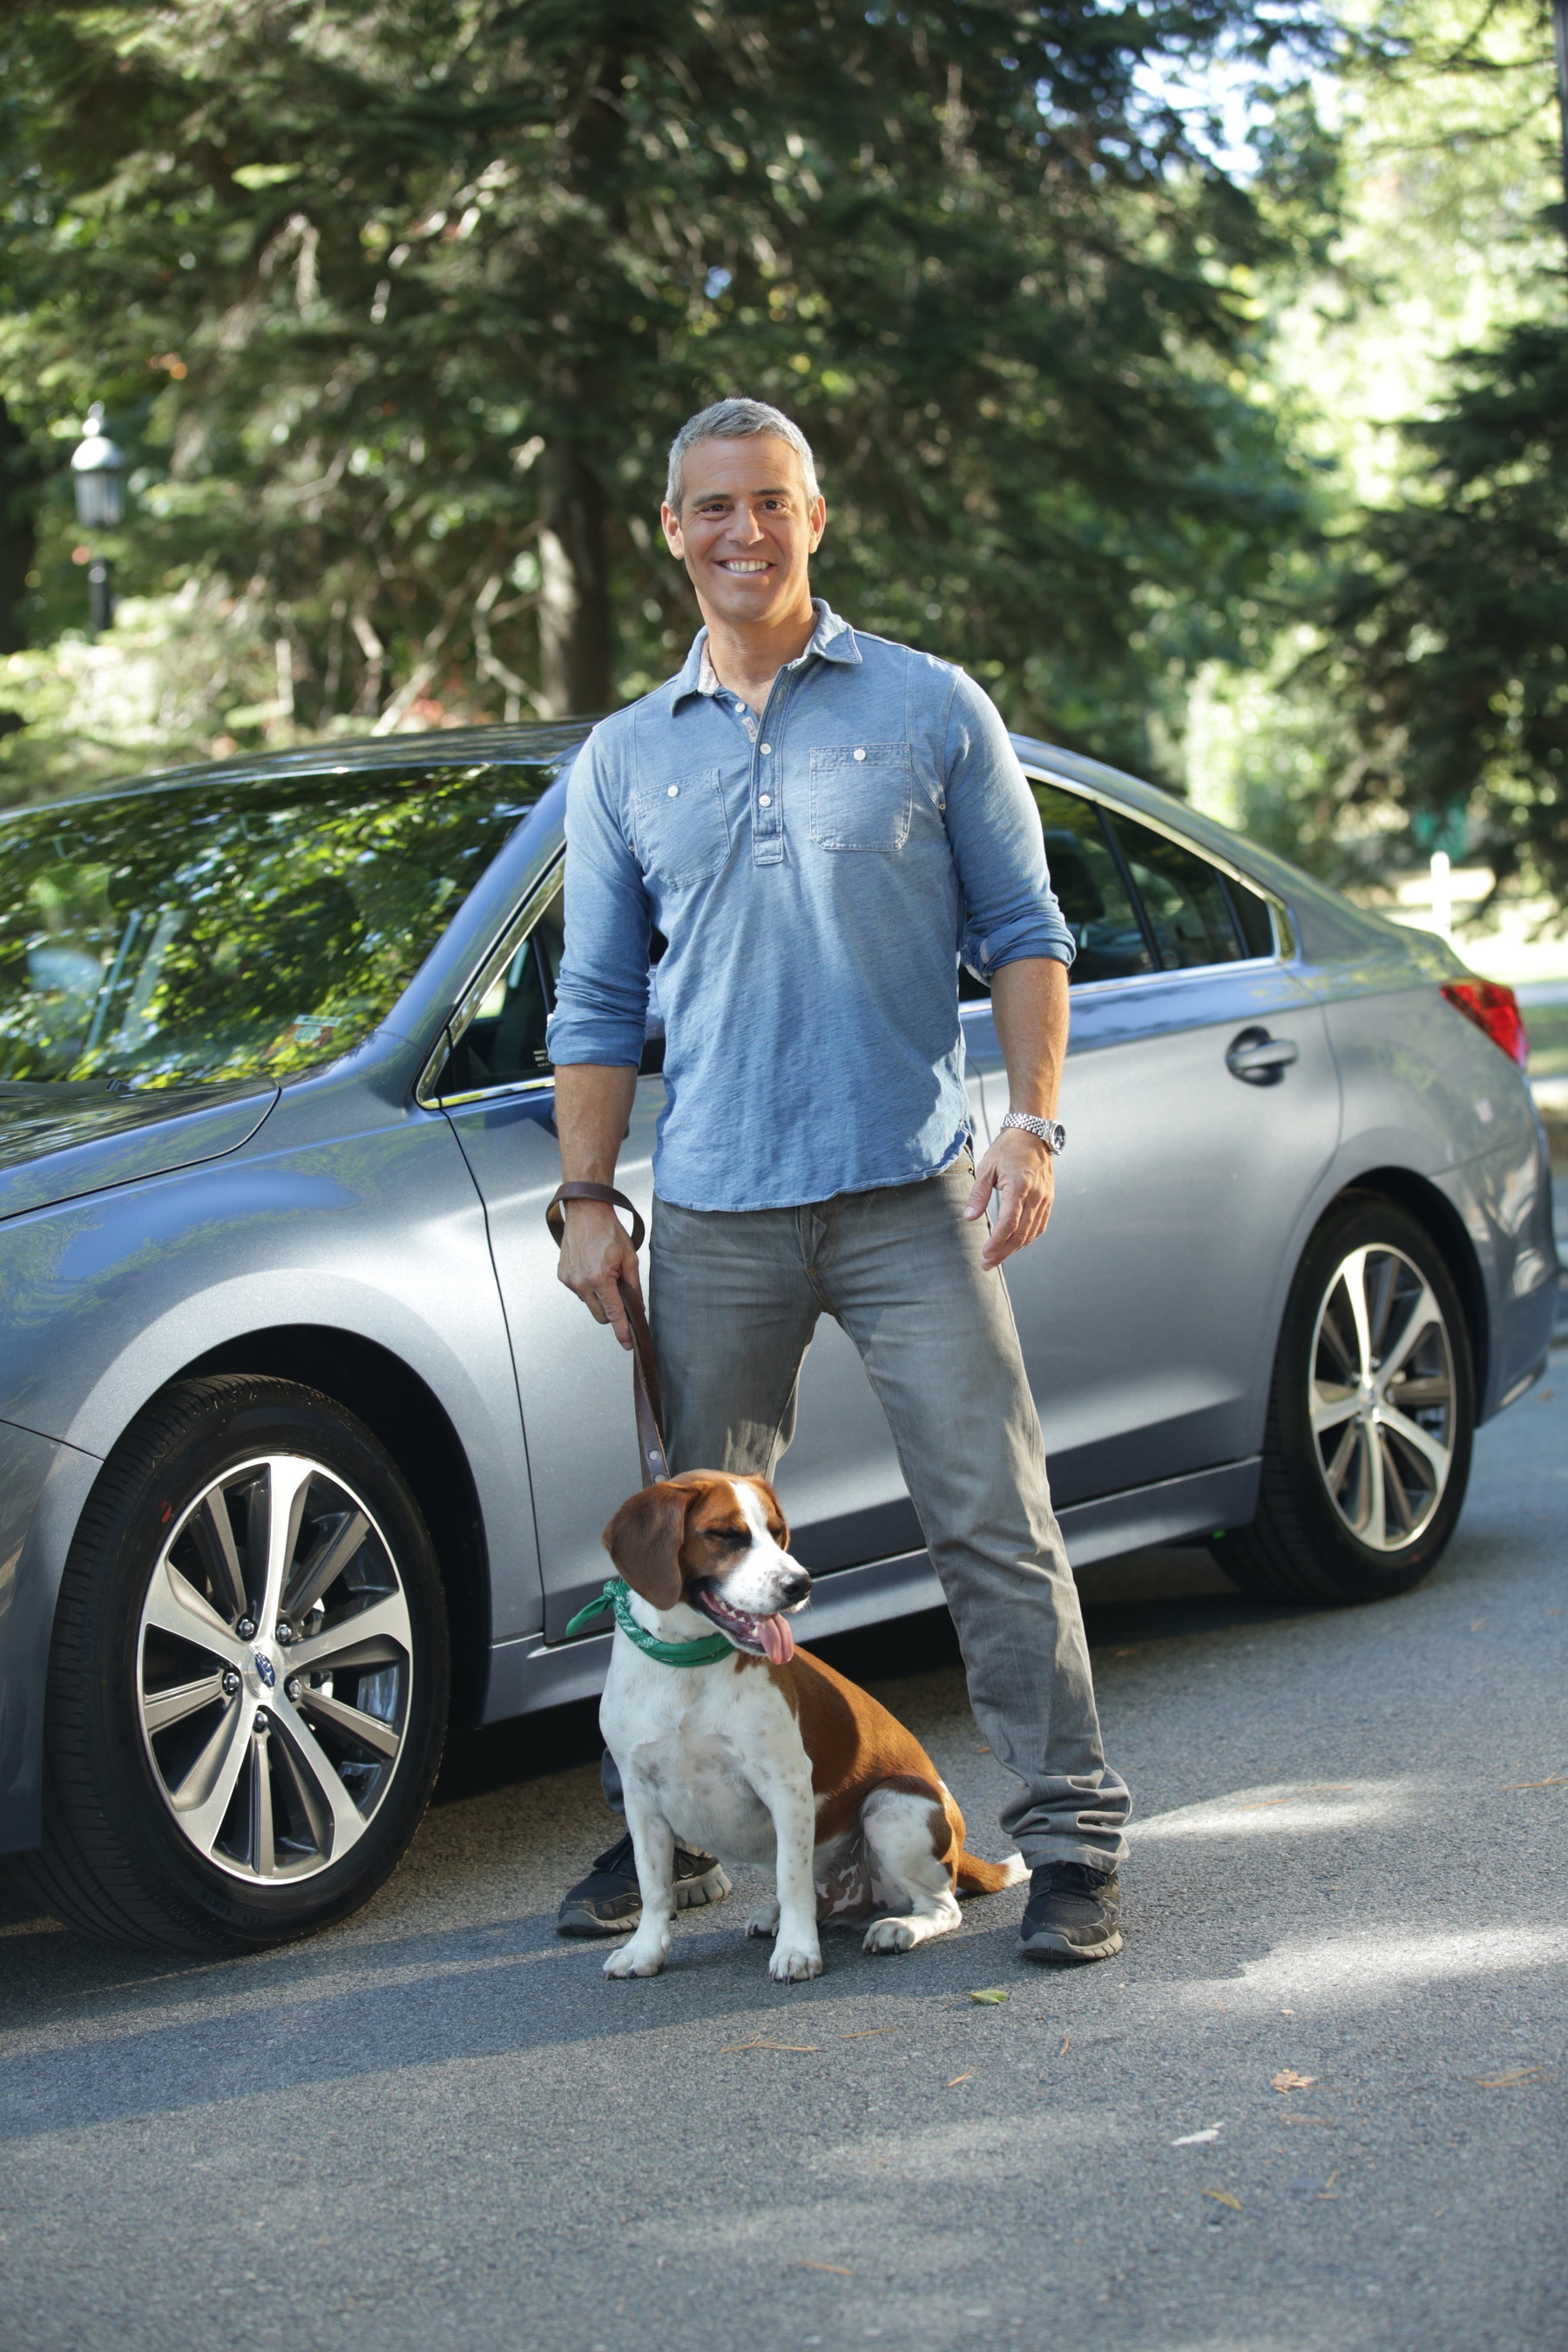 Subaru of America is the first company to partner with NBCUniversal's "The More You Know". The first public service announcement features Bravo star, Andy Cohen, who addresses the importance of giving back to the community, including pet adoption, alongside his adopted dog, Wacha.